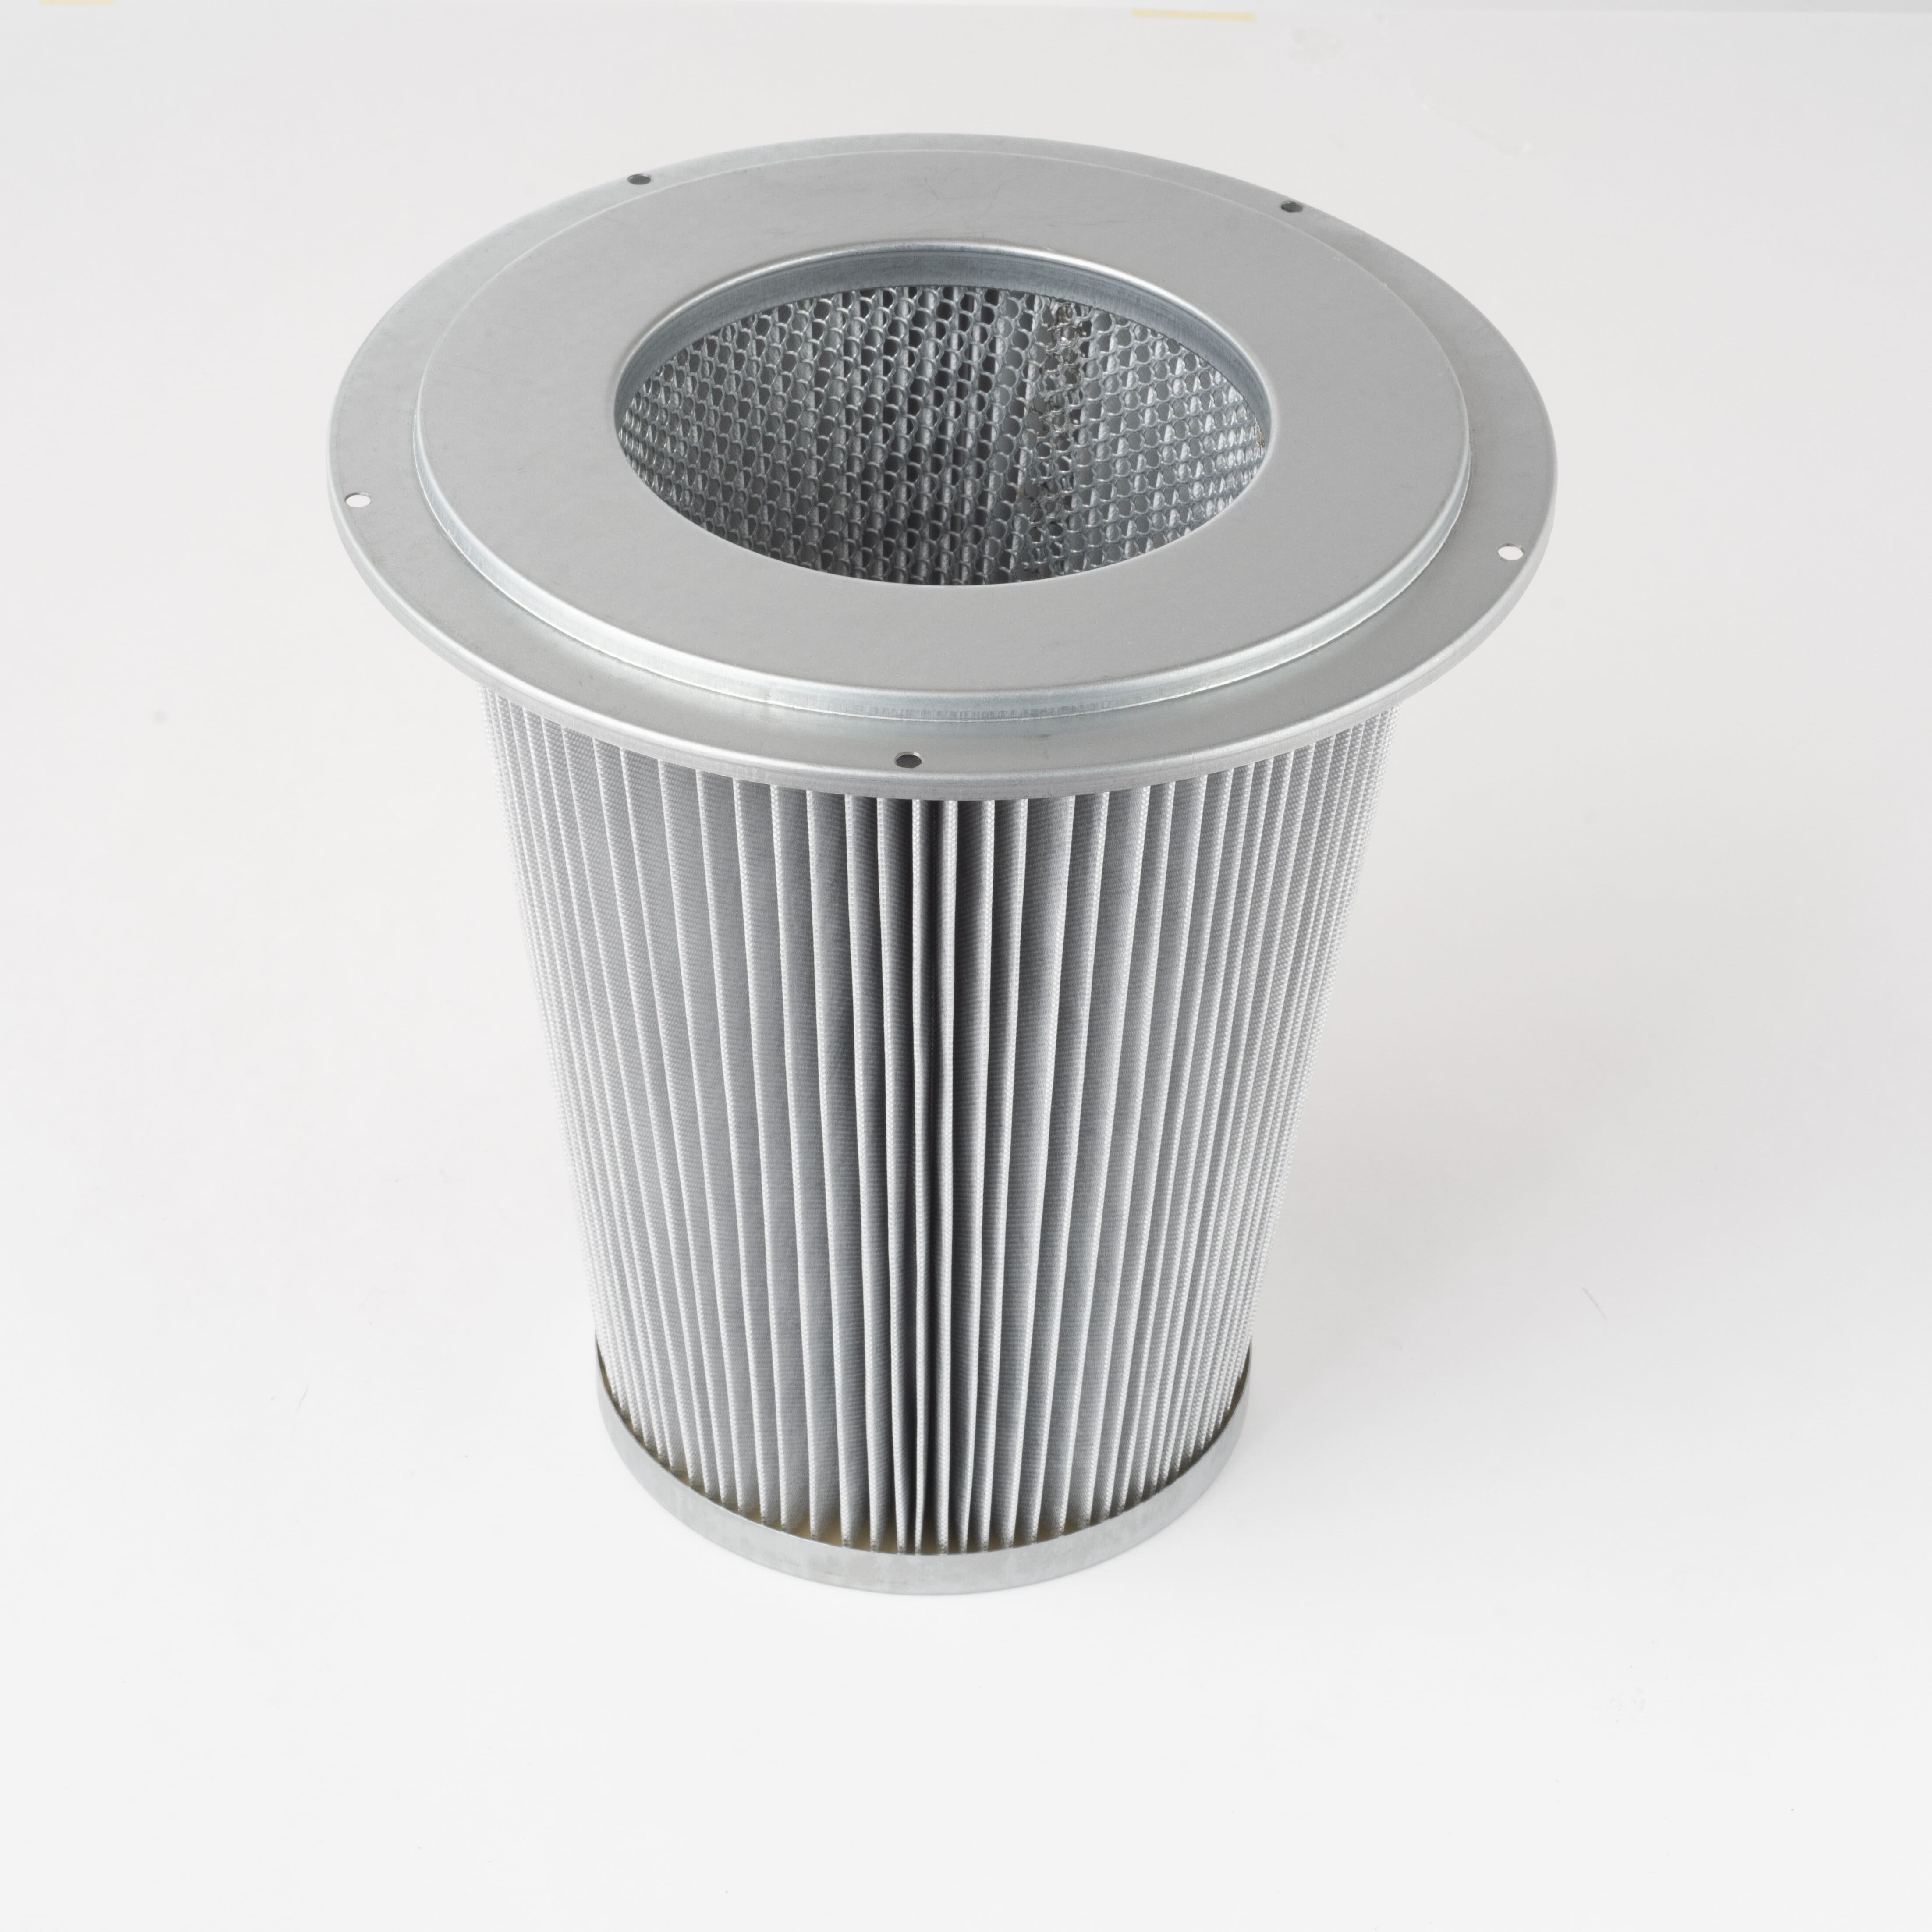 Conical cartridge filter